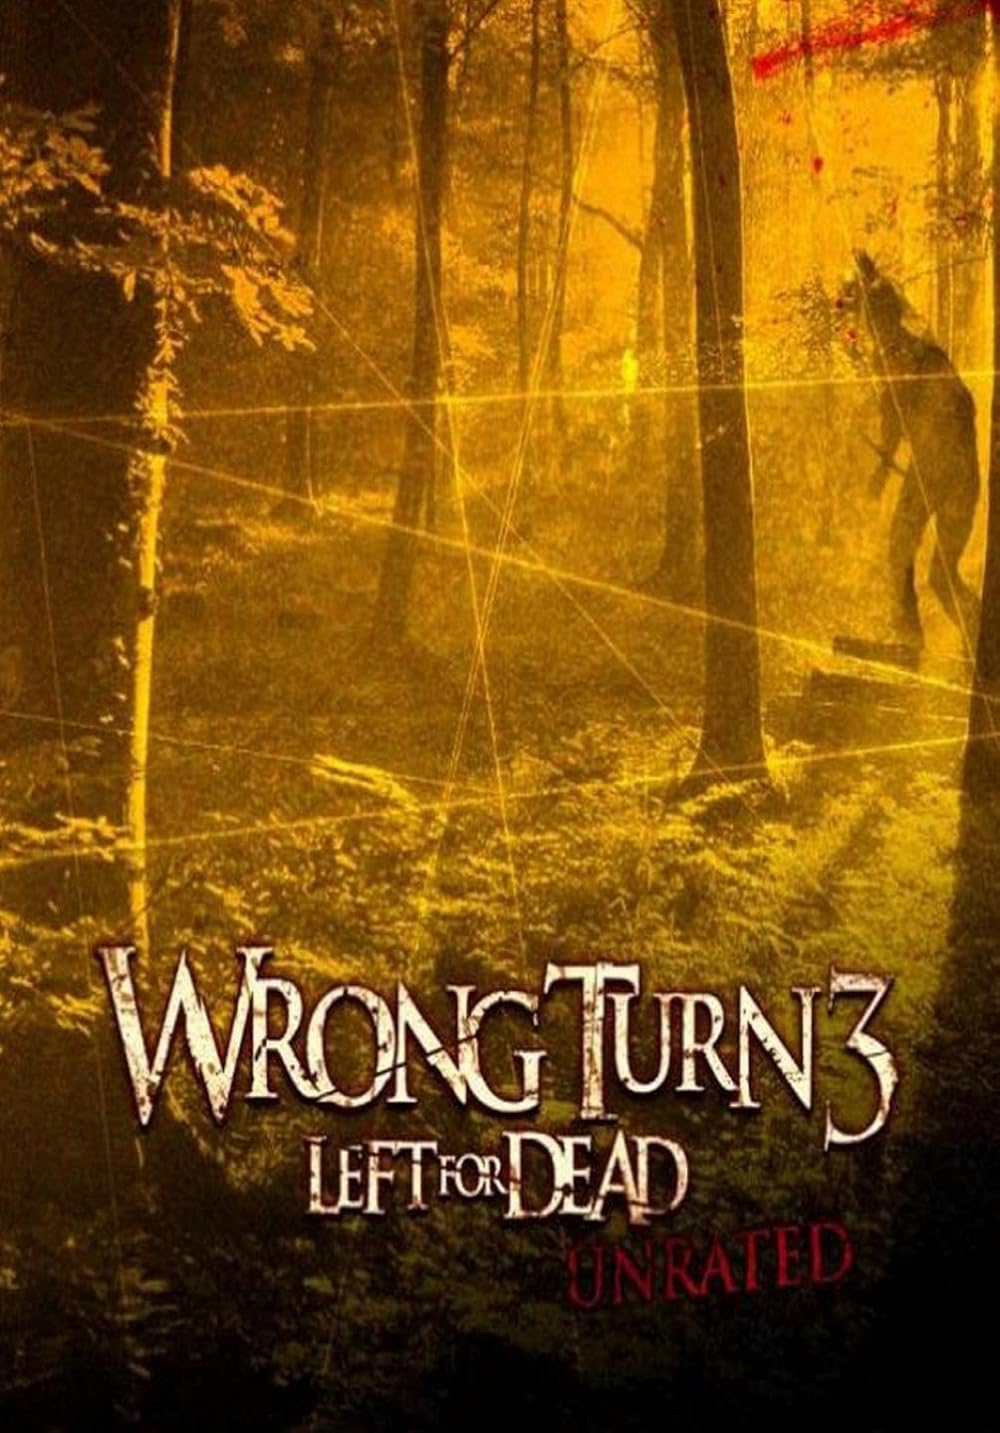 Wrong Turn 3 Left for Dead (2009) Unrated Cut 128Kbps 23.976Fps 48Khz 2.0Ch NF DD+ E-AC3 Turkish Audio TAC